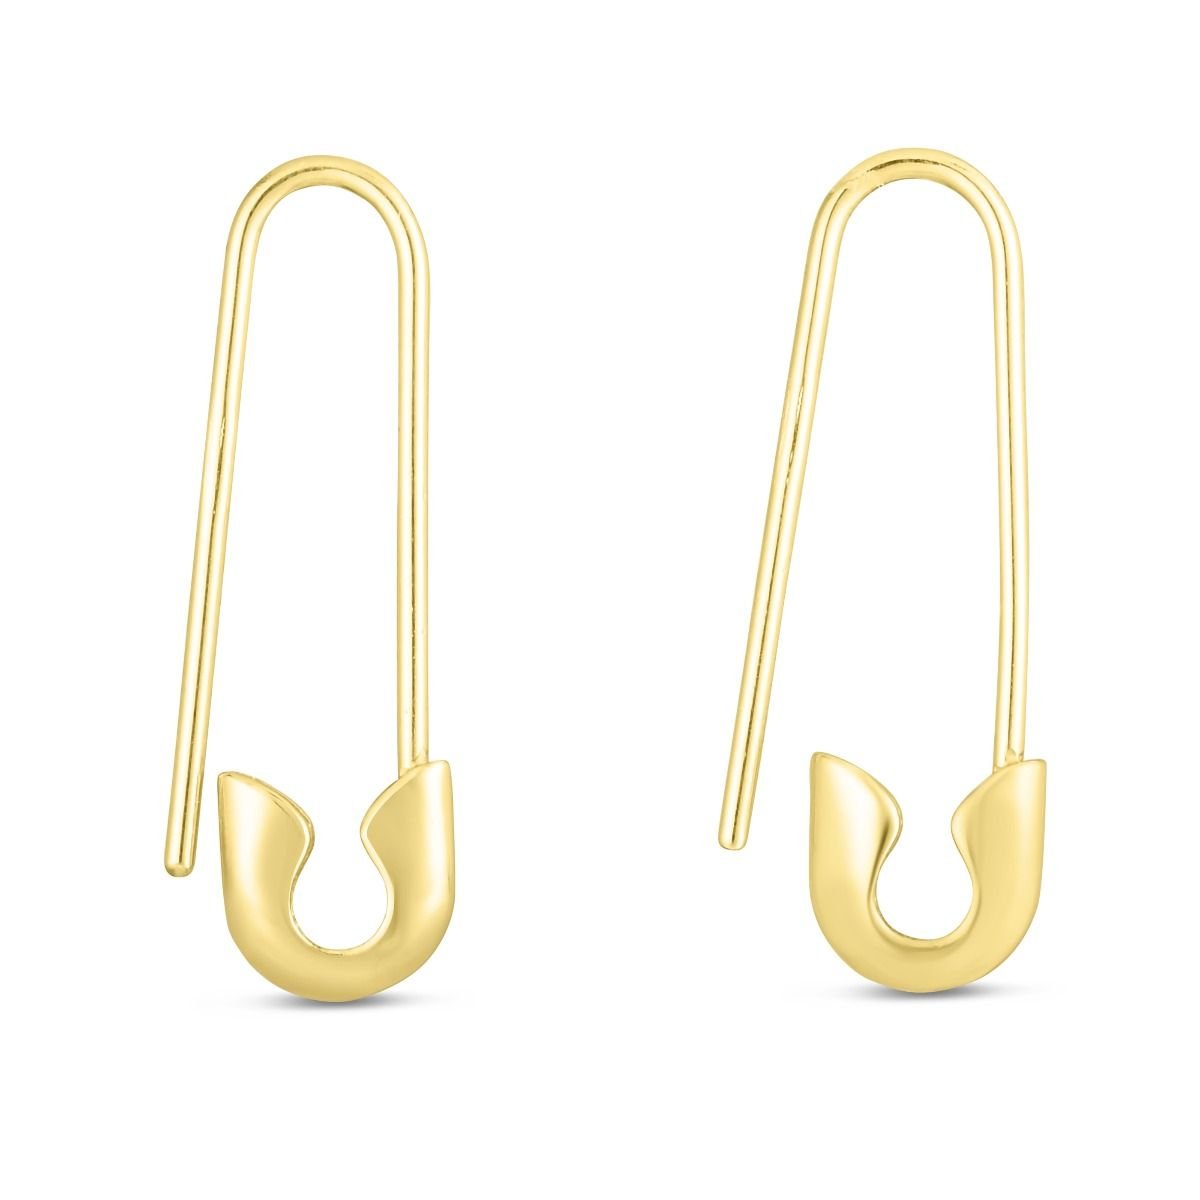 14K Yellow Gold Trendy Safety Pin Drop Earring